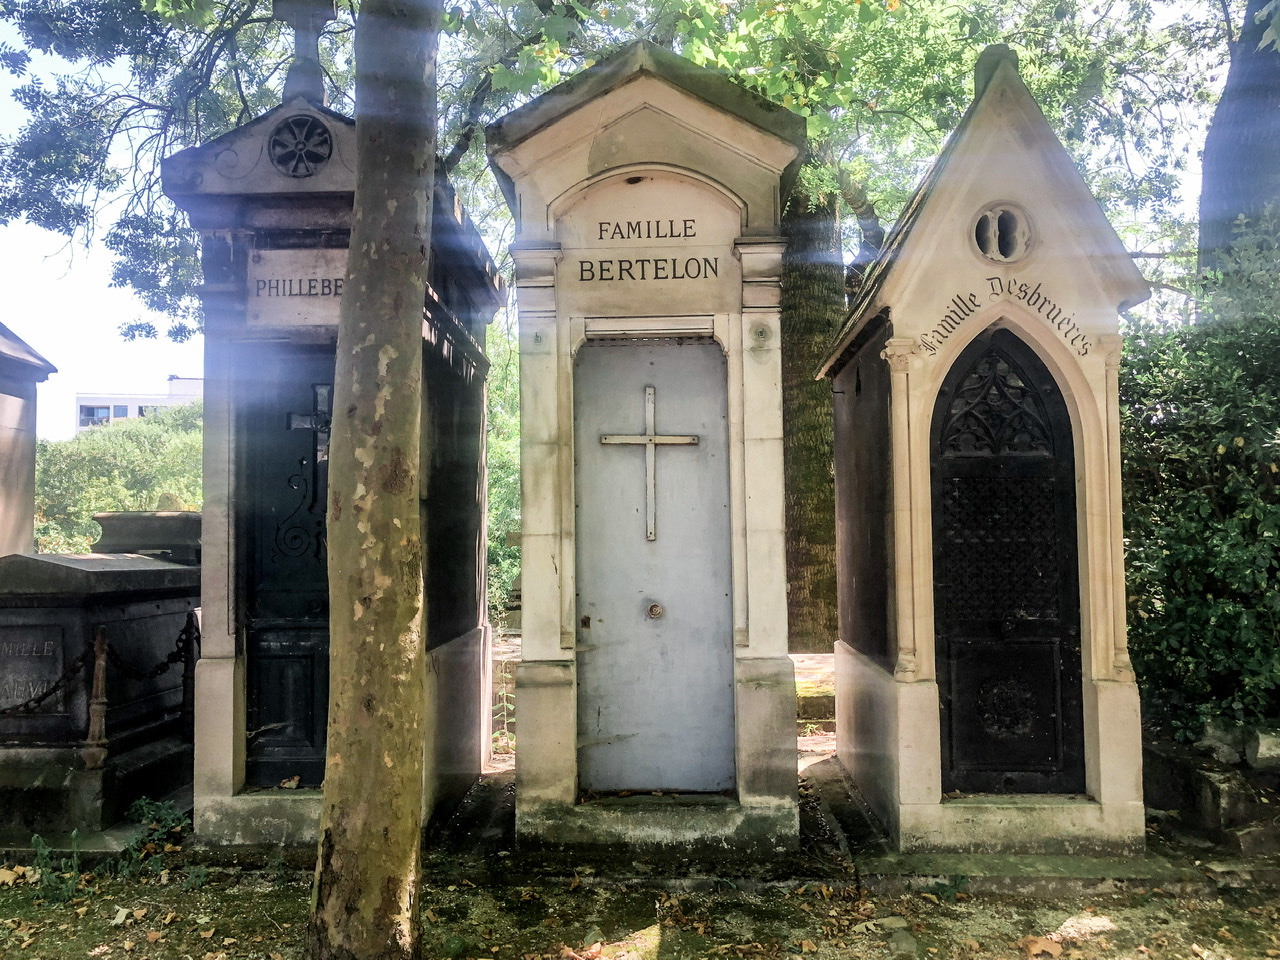 Three tall, skinny family vaults in Graves in Parc Père Lachaise Cemetery Paris